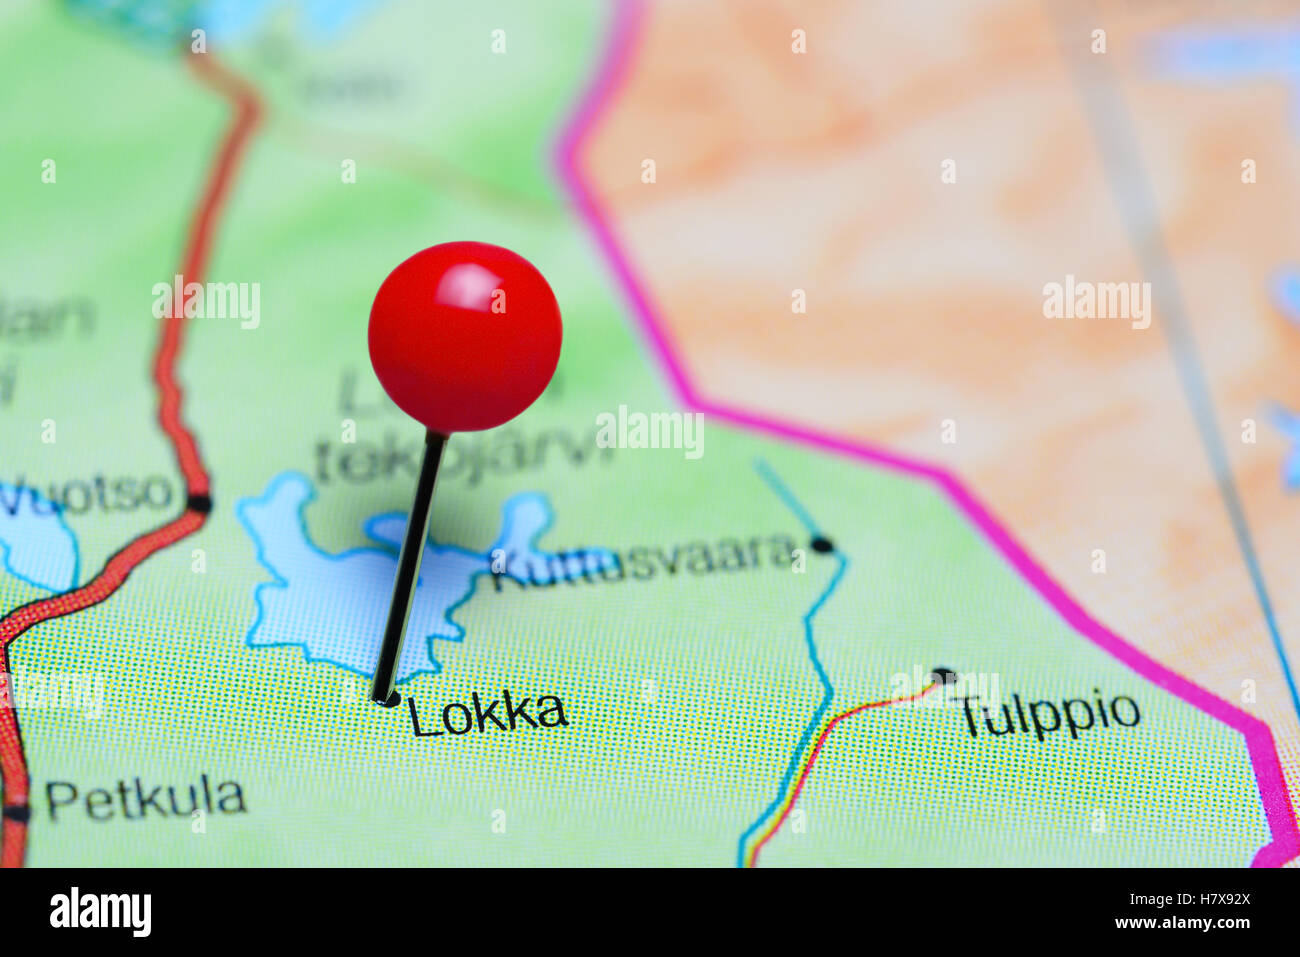 Lokka pinned on a map of Finland Stock Photo